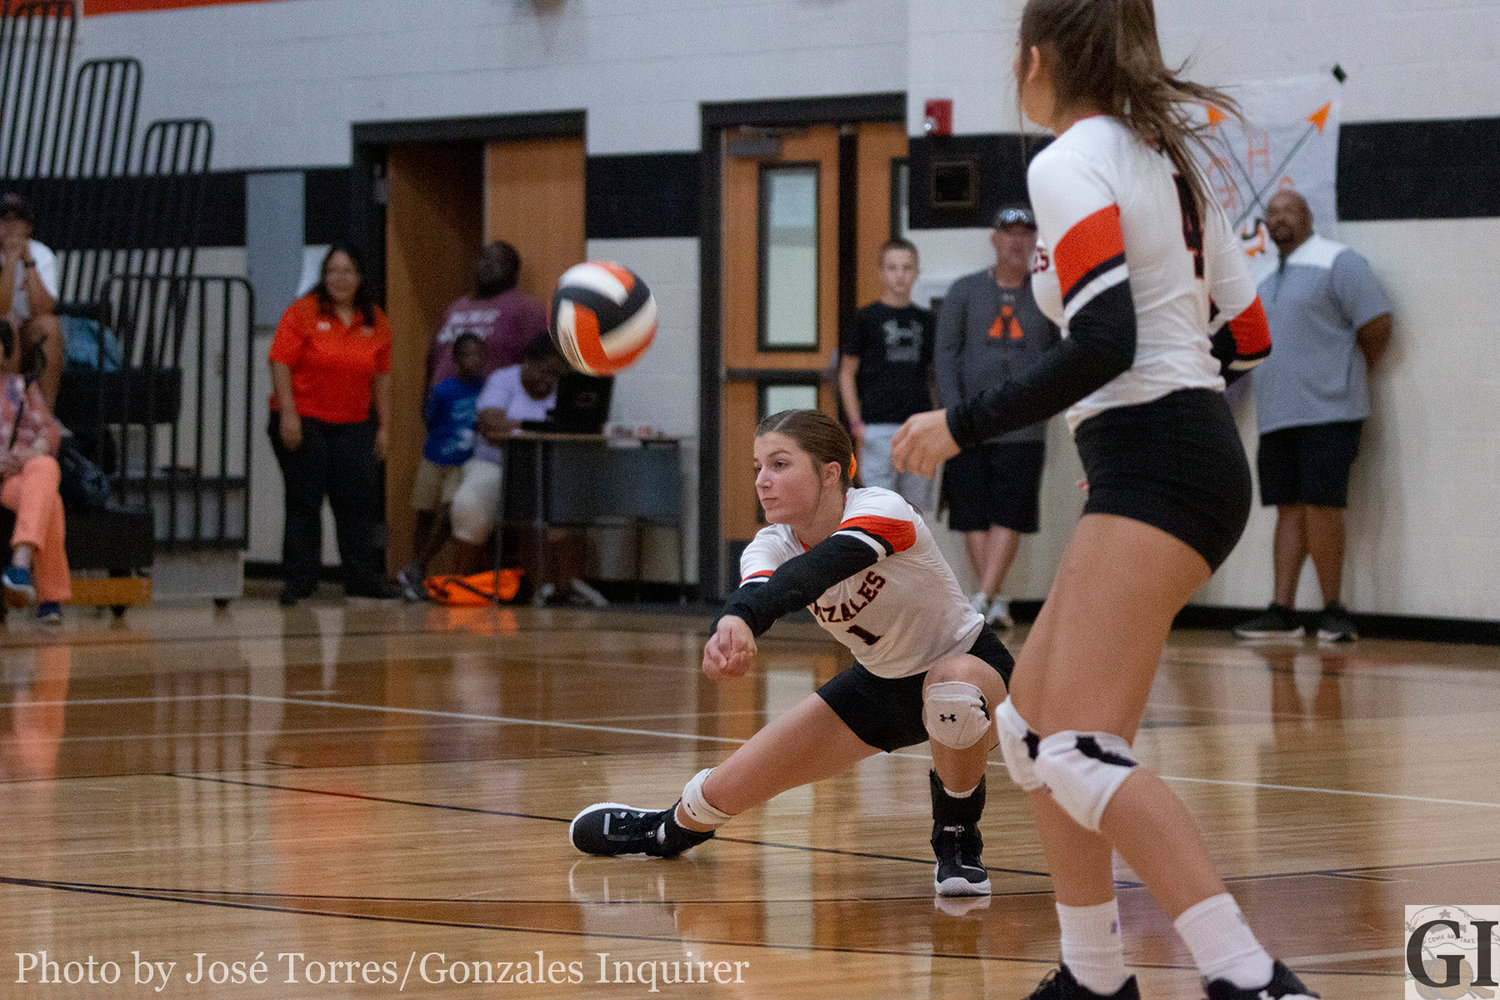 Sam Barnick gets down for a dig.